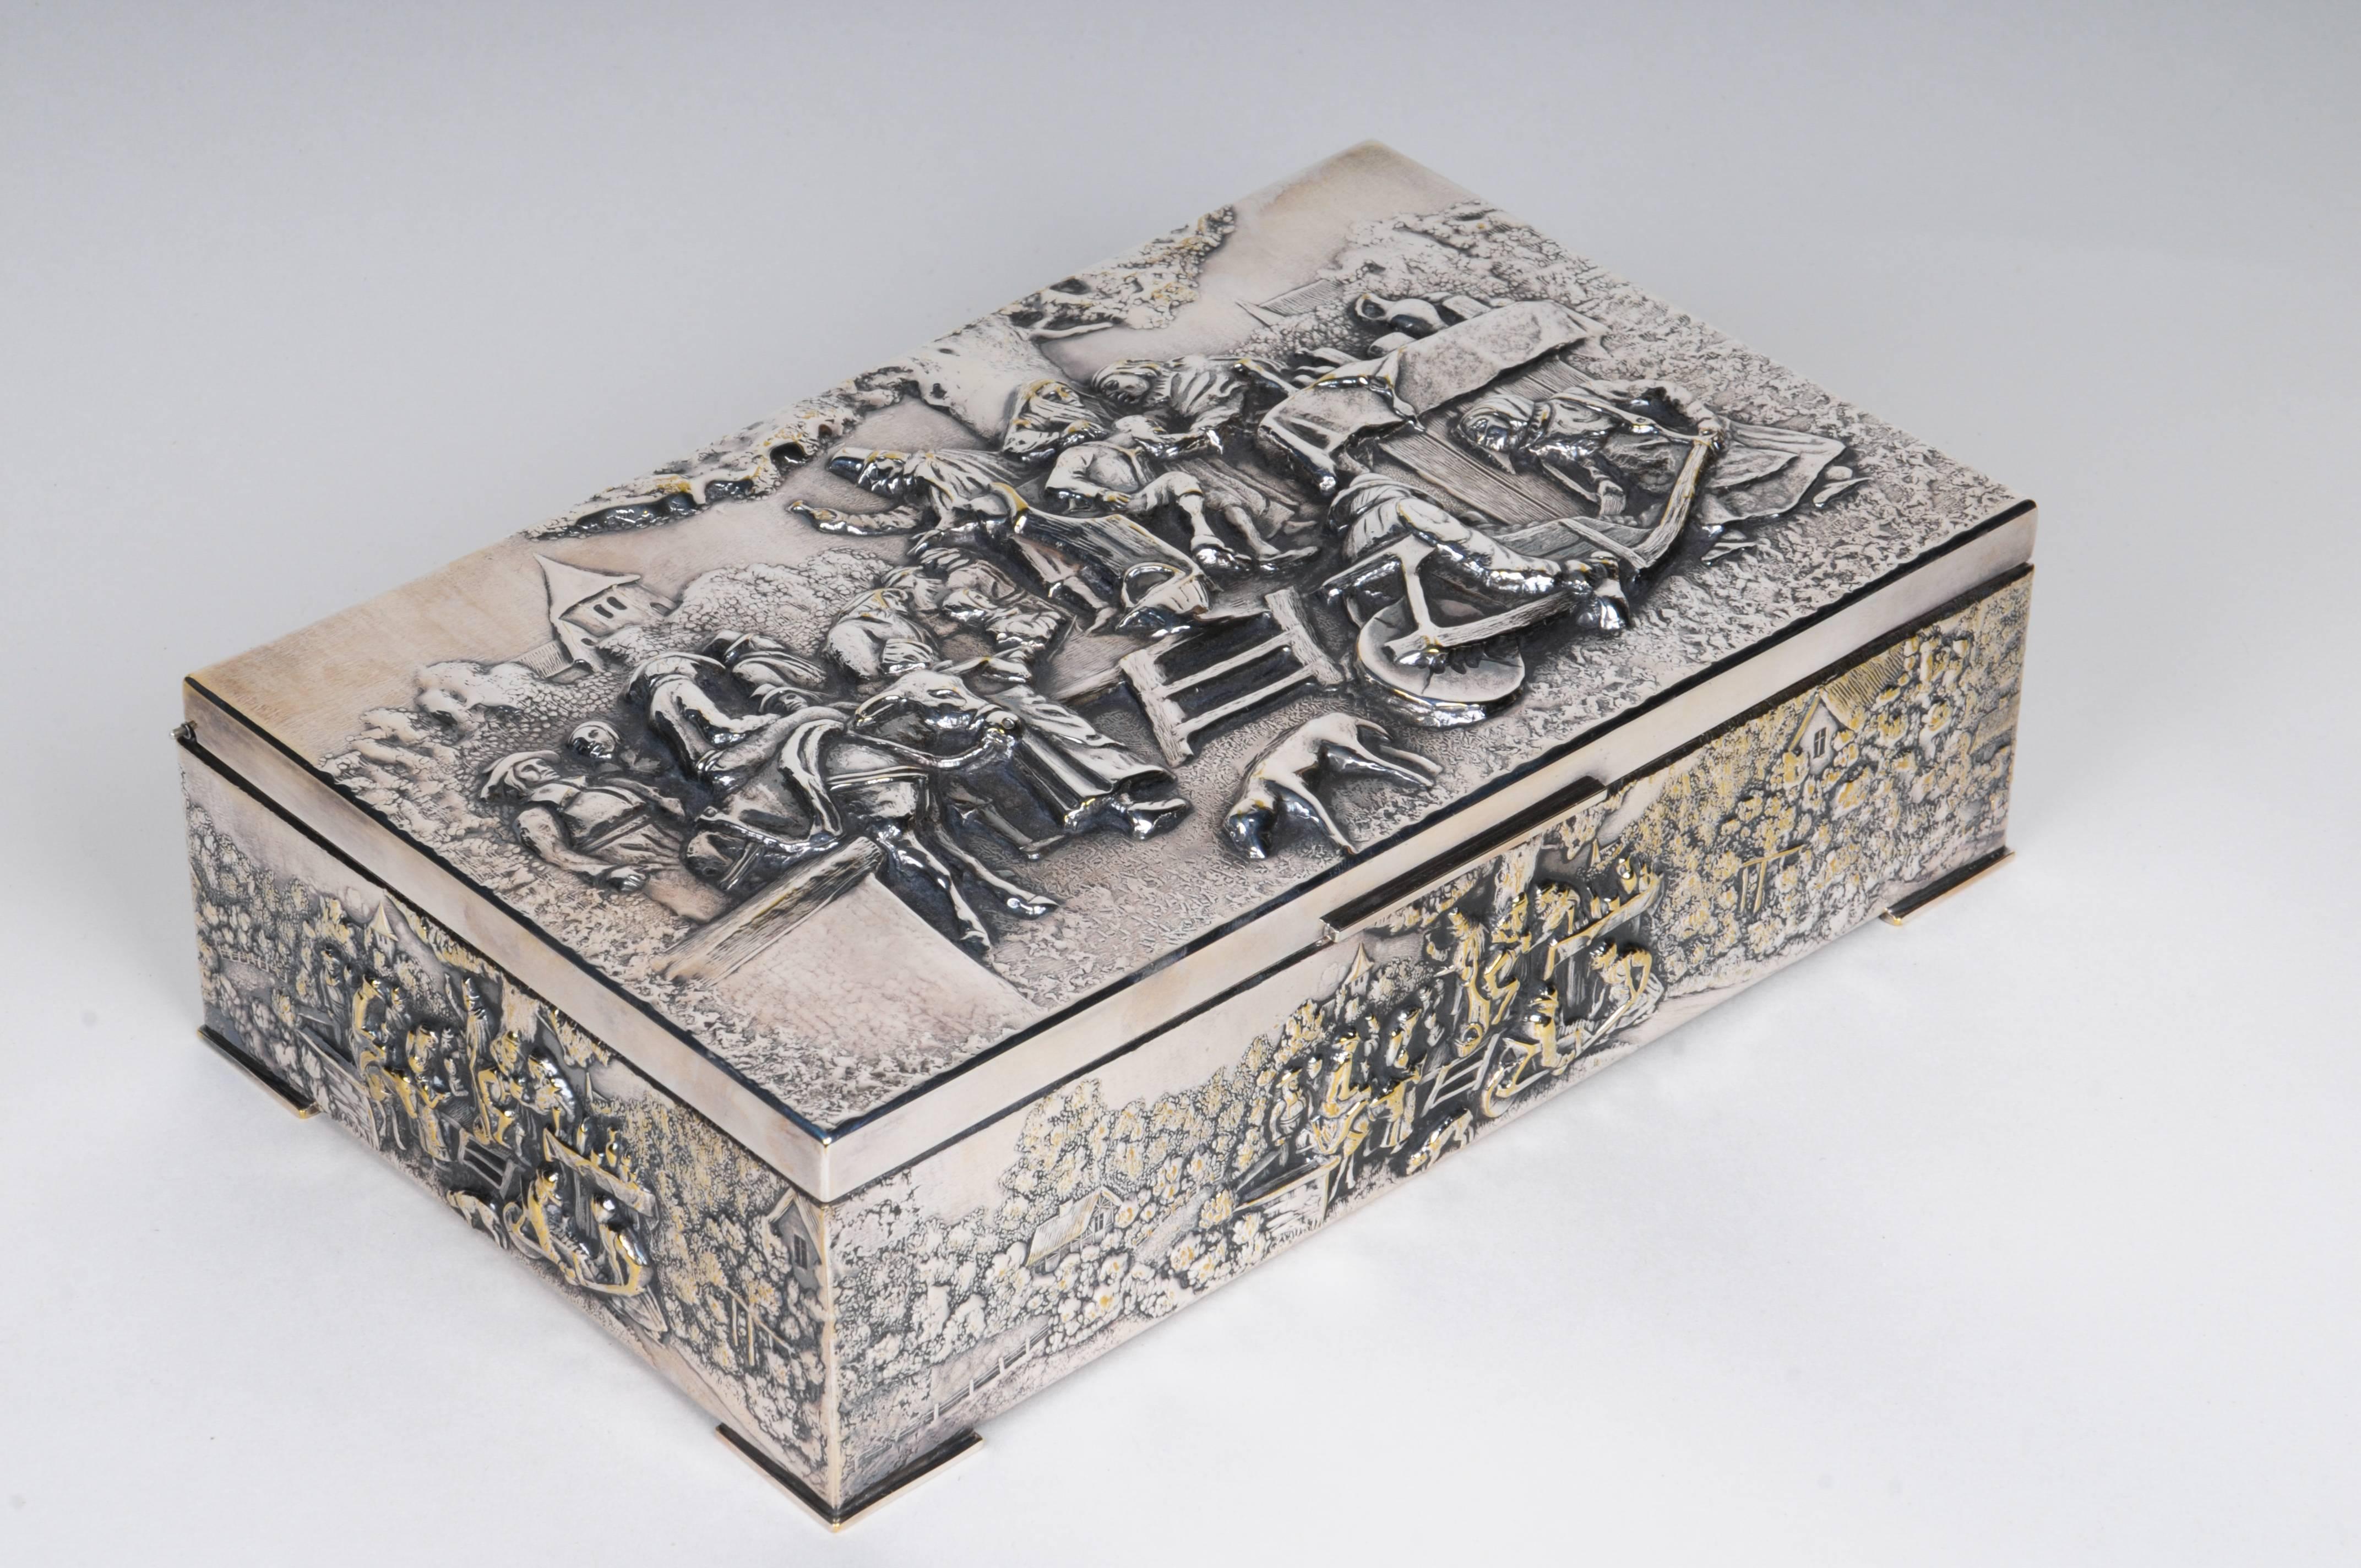 Continental Silverplate covered rectangular box
Cedar Interior. Hinged cover. High relief repousse village scene. Dutch or German. 
19th  - Early 20th C.
Size: 3"D x 6"W x 9.5"H